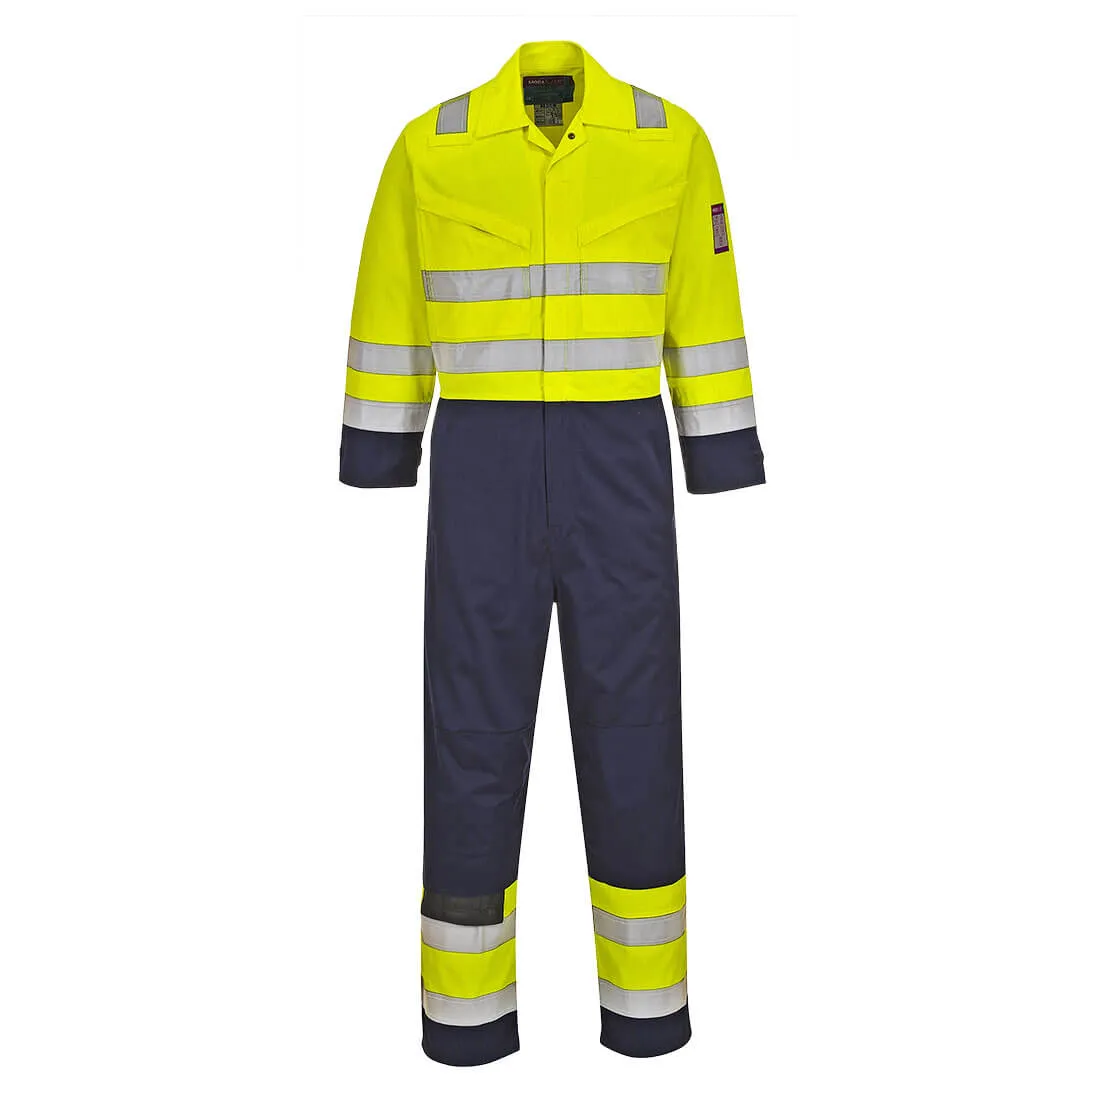 Modaflame Flame Resistant Hi Vis Overall - Yellow / Navy, 4XL, 32"